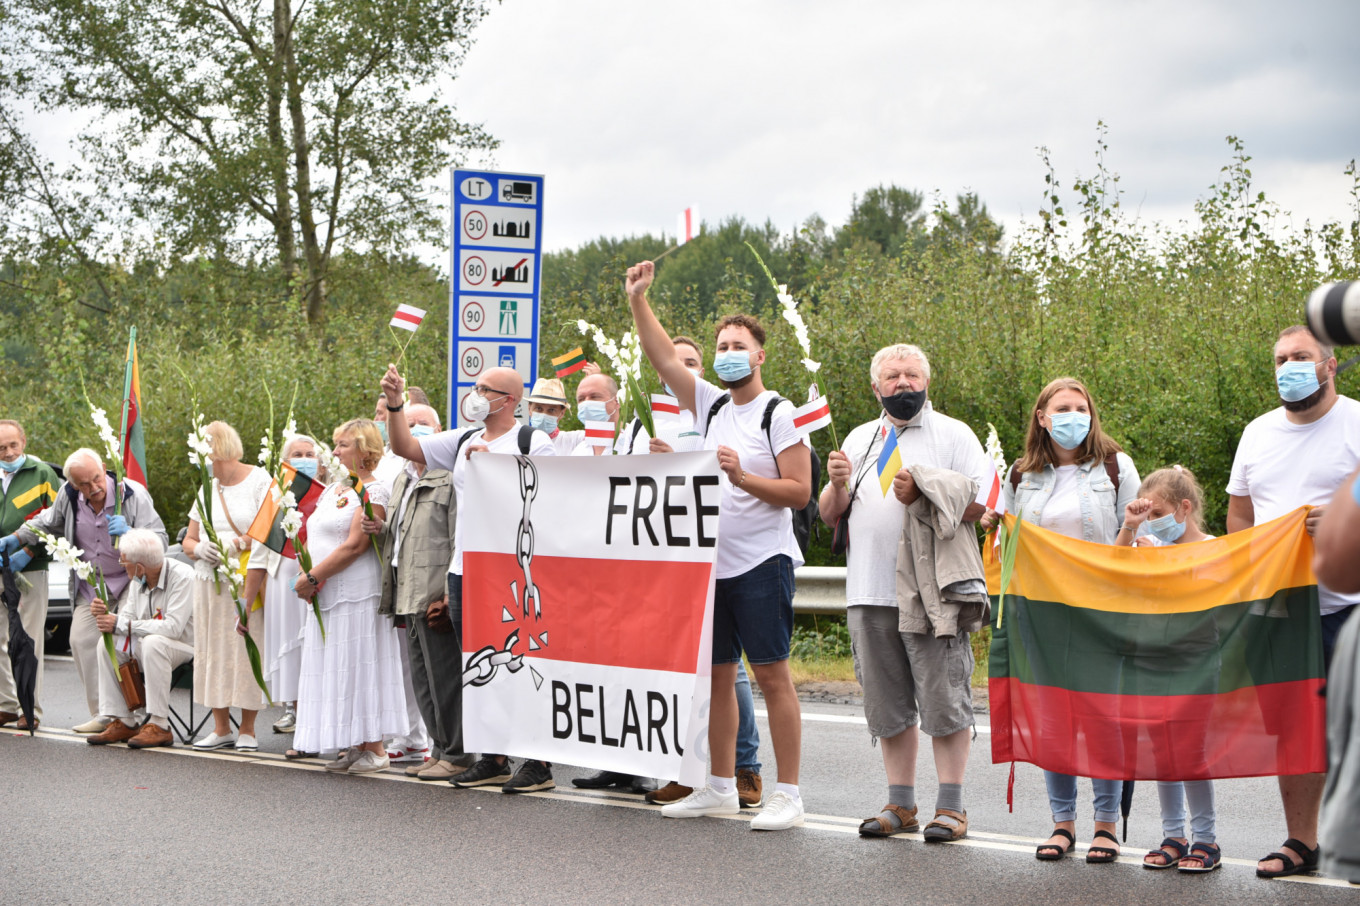 Tens of Thousands in Lithuania Form Human Chain for Belarus